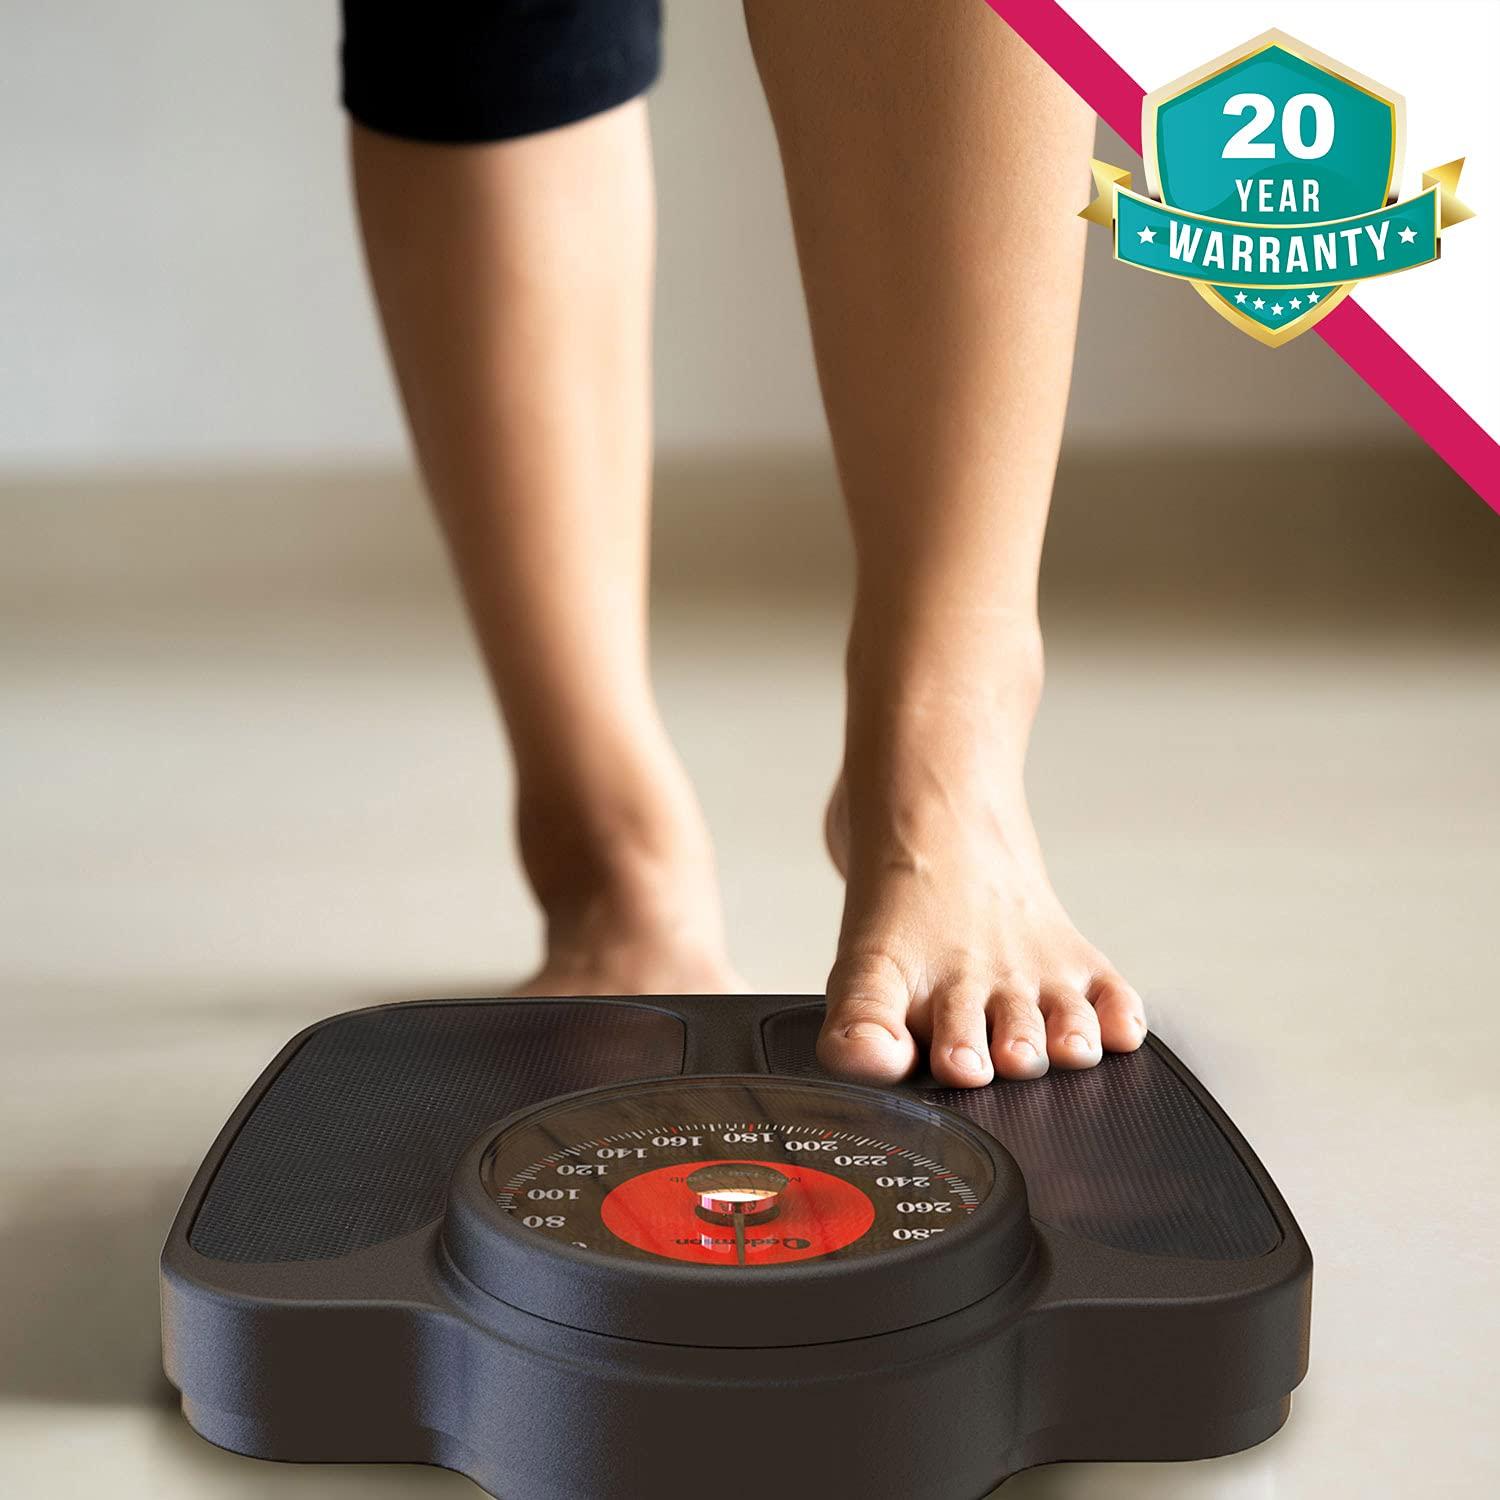 Certified Used Adamson A24 Scale for Body Weight - Up to 350 LB, Anti-Skid  Rubber Surface, Extra Large Numbers - High Precision Bathroom Scale Analog  